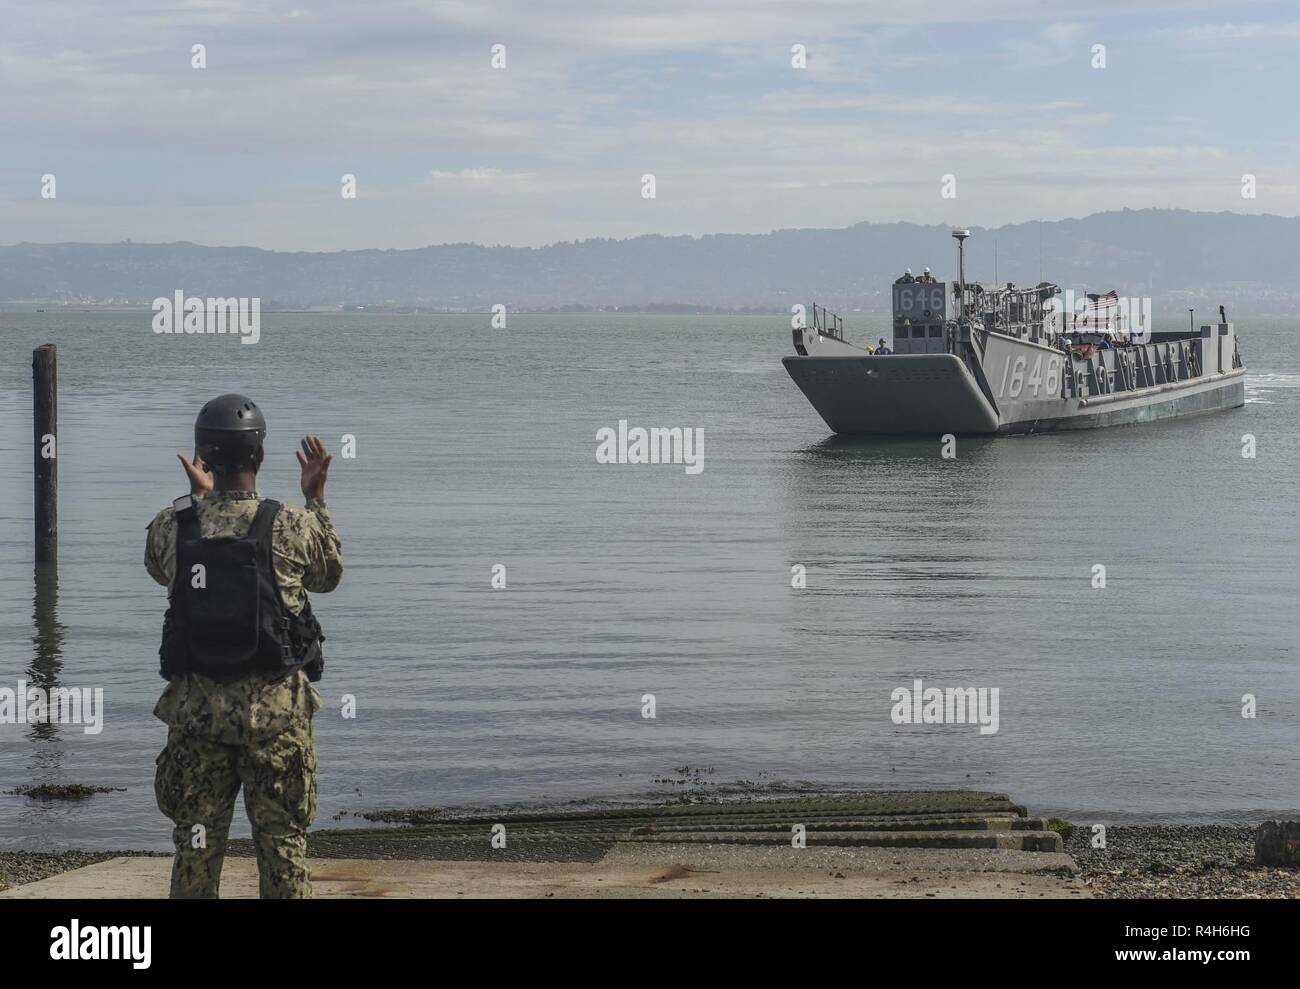 SAN FRANCISCO (Oct. 2, 2018) Boatswain’s Mate Seaman Mark Durand, a native of St. John, U.S. Virgin Islands, guides a landing craft unit to the beach during the annual Defense Support of Civil Authorities (DSCA) exercise at San Francisco Fleet Week (SFFW) 2018. SFFW is an opportunity for the American public to meet their Navy, Marine Corps and Coast Guard teams and experience America's sea services. During fleet week, service members participate in various community service events, showcase capabilities and equipment to the community, and enjoy the hospitality of San Francisco and its surround Stock Photo